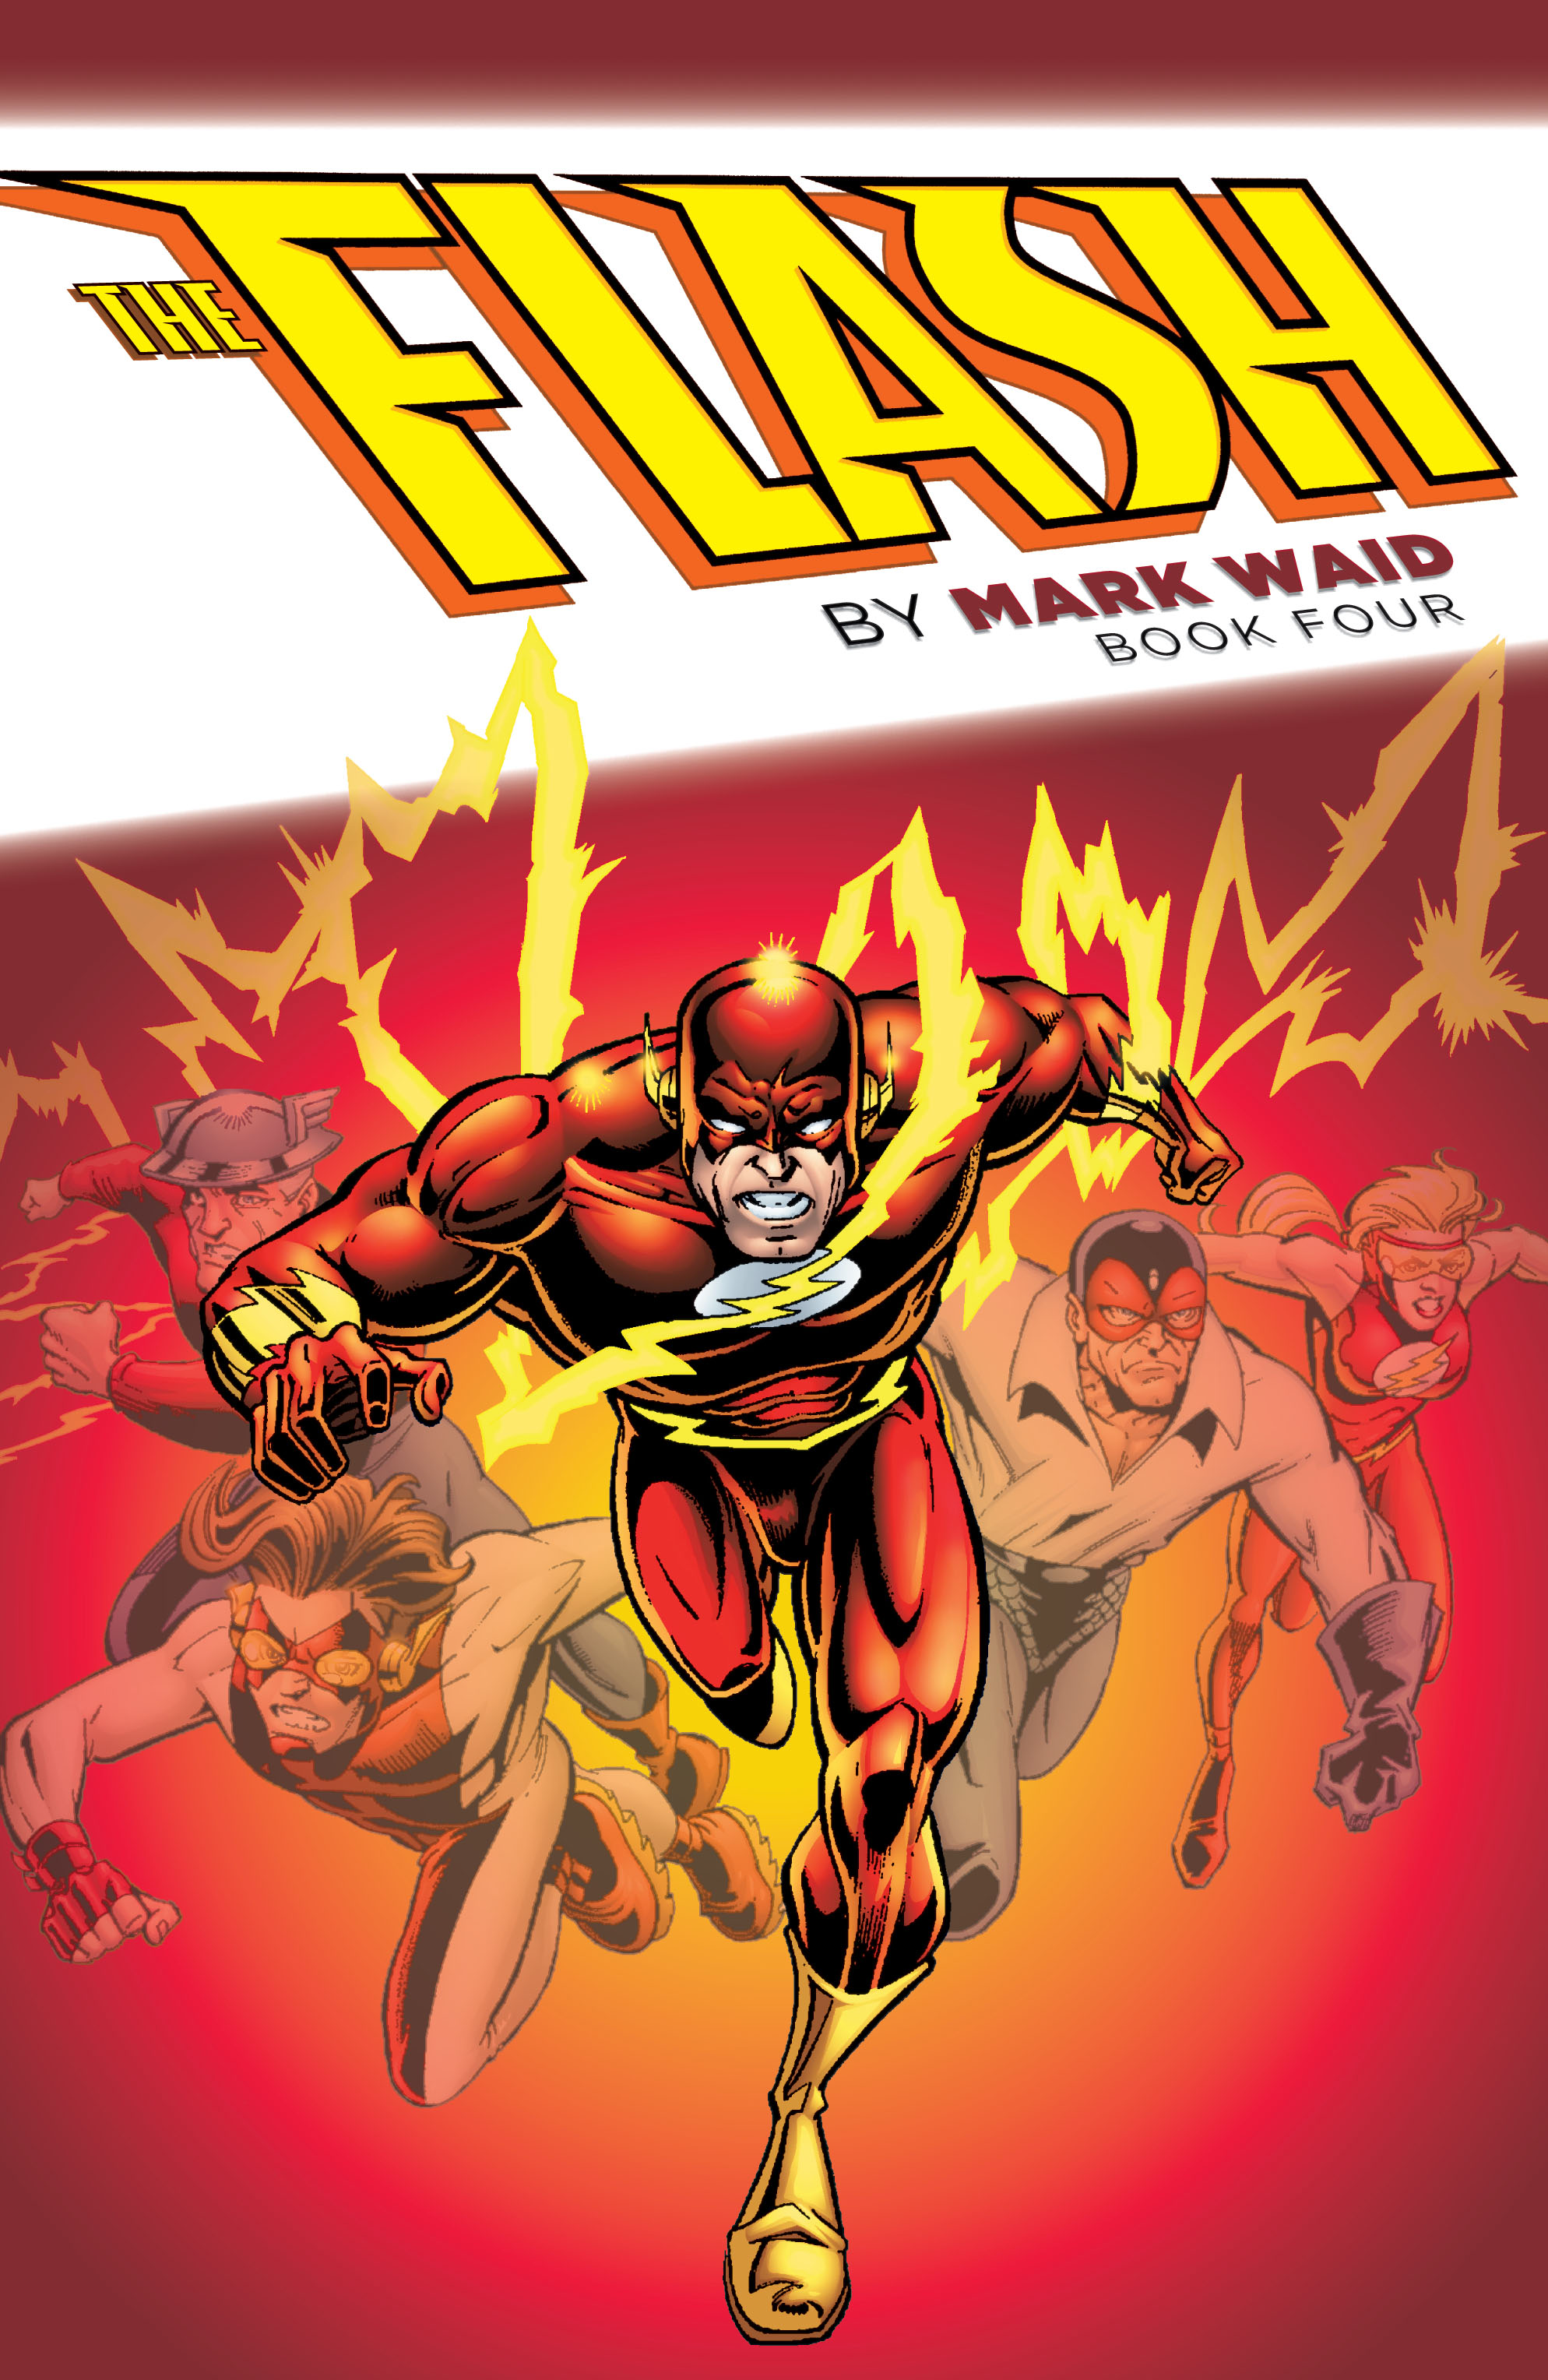 Read online The Flash (1987) comic -  Issue # _TPB The Flash by Mark Waid Book 4 (Part 1) - 2